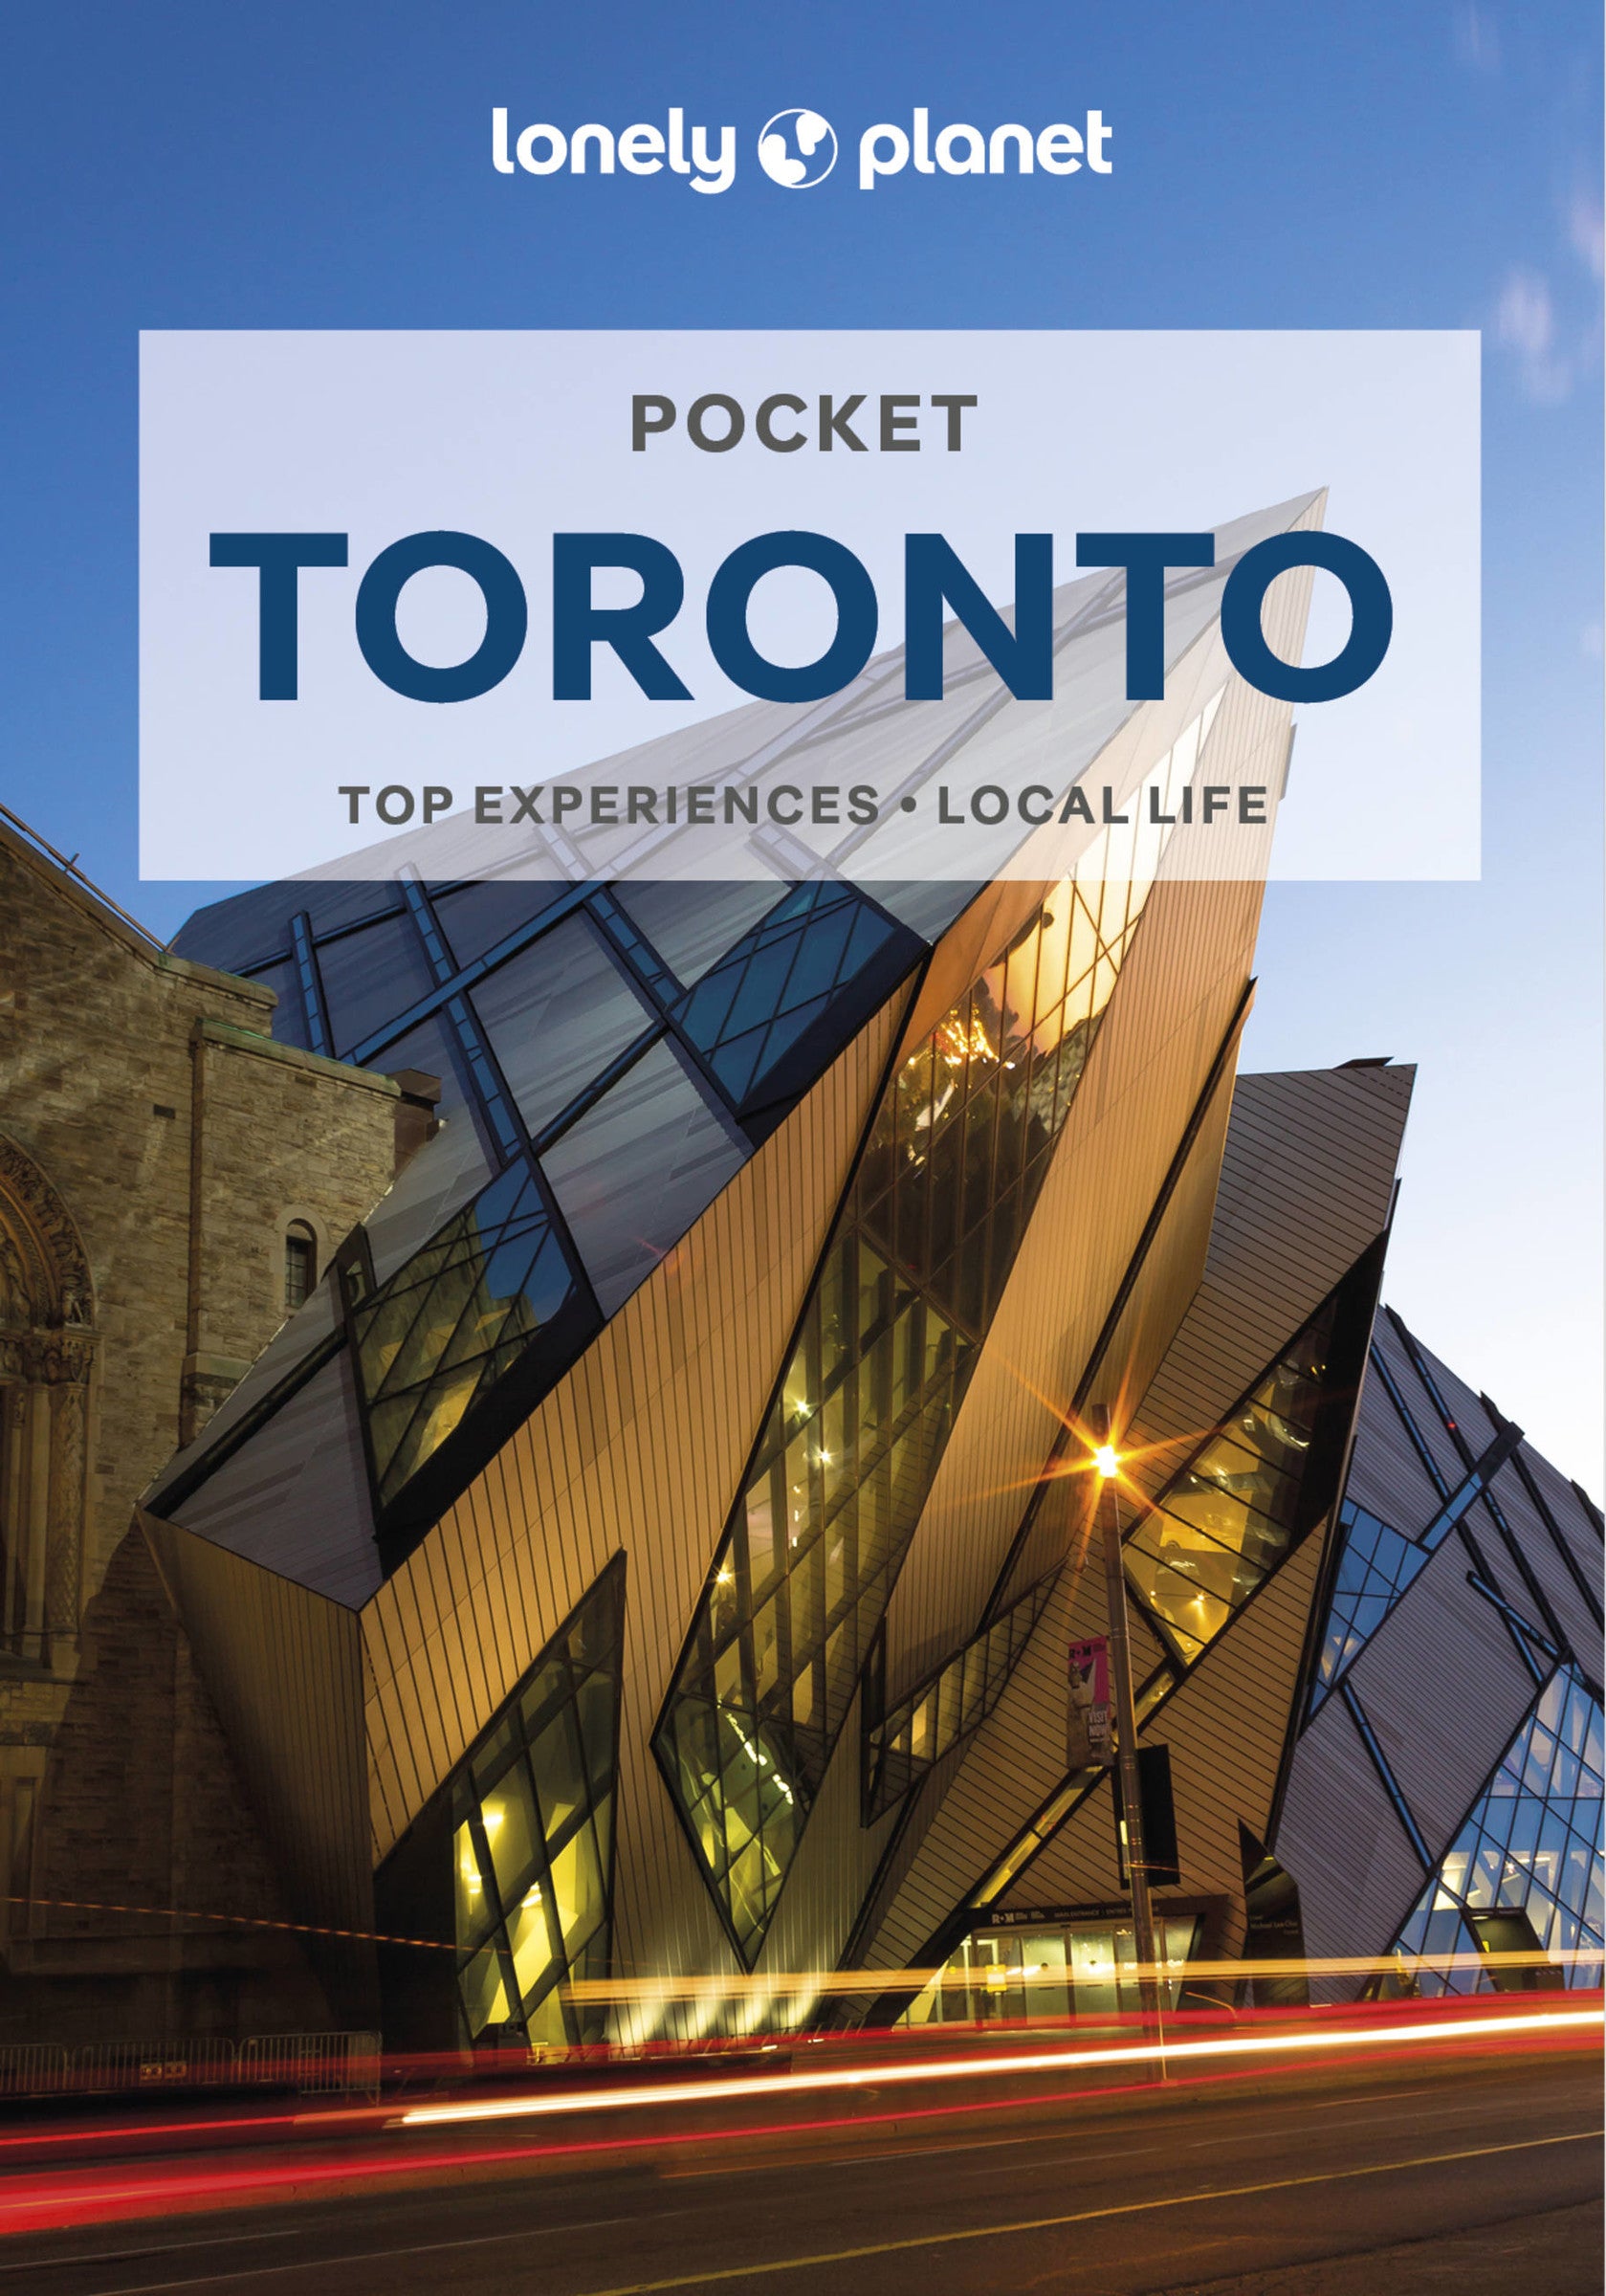 2nd　Pocket　Toronto　Lonely　Toronto's　Gift　Planet　Spacing　Ed.　City　Store　–　Store: